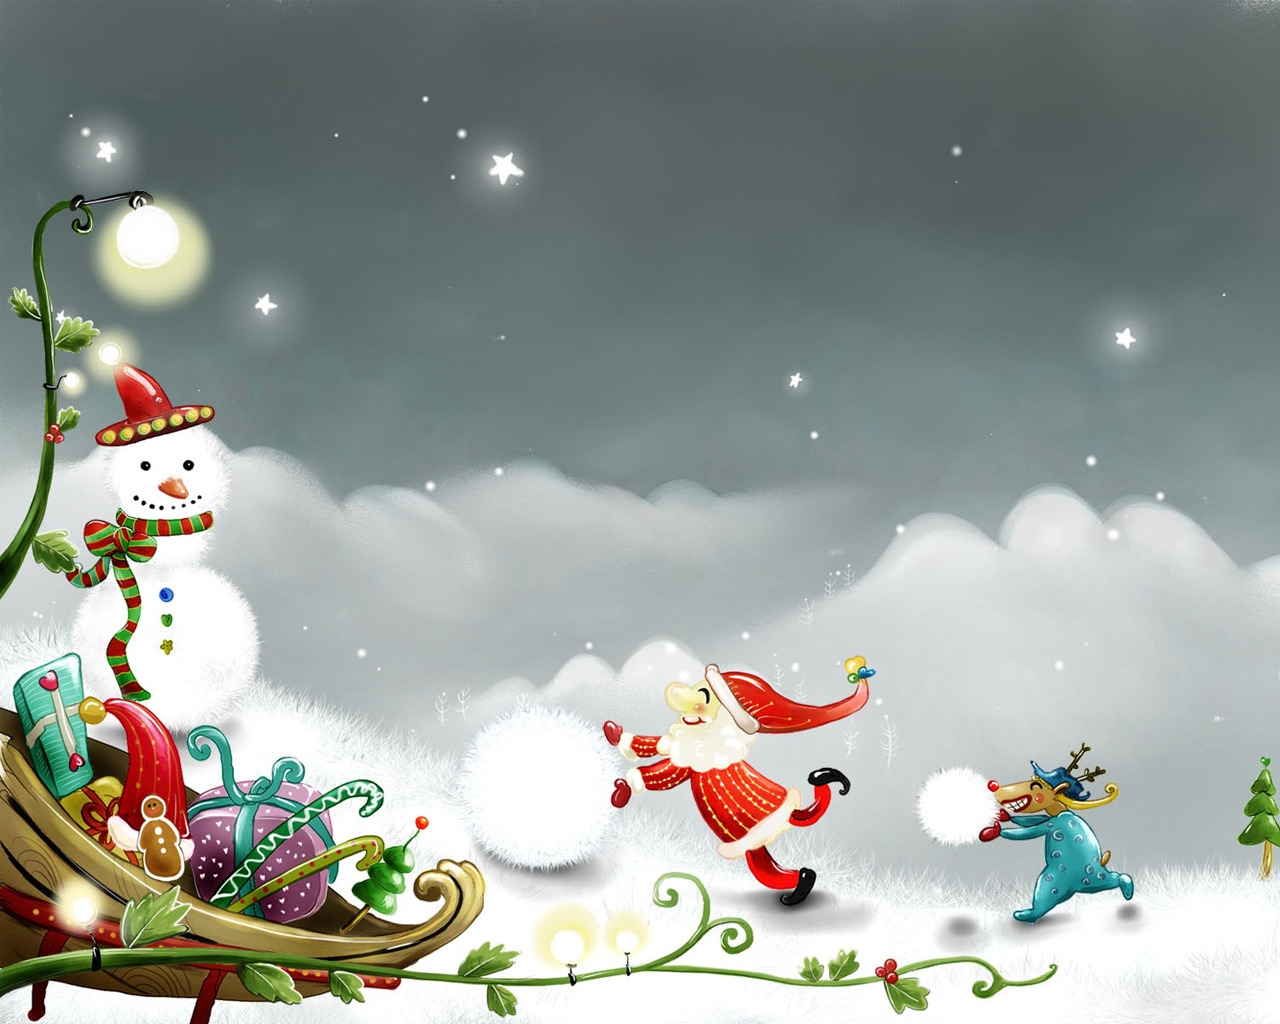 Snowman and Santa Claus for 1280 x 1024 resolution